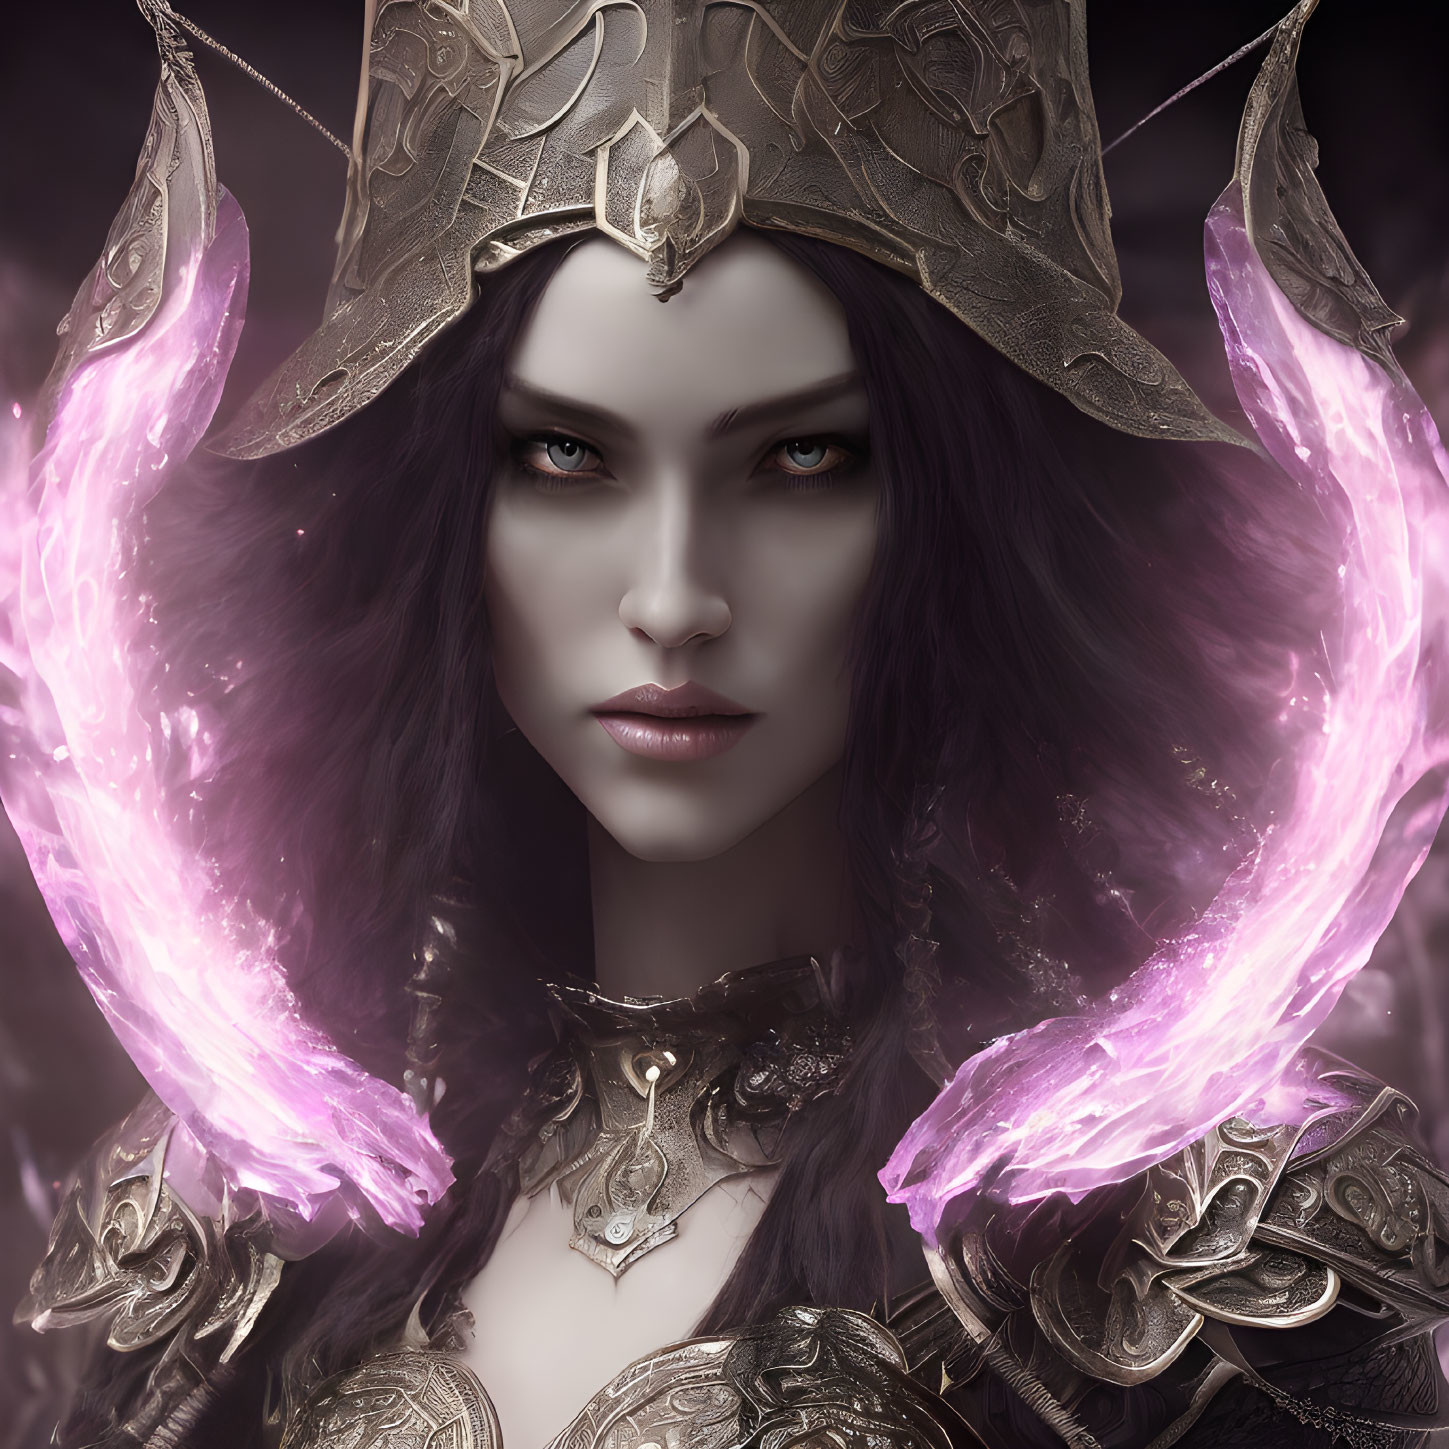 Pale-skinned female in golden armor with dark hair and crown, surrounded by purple magic.